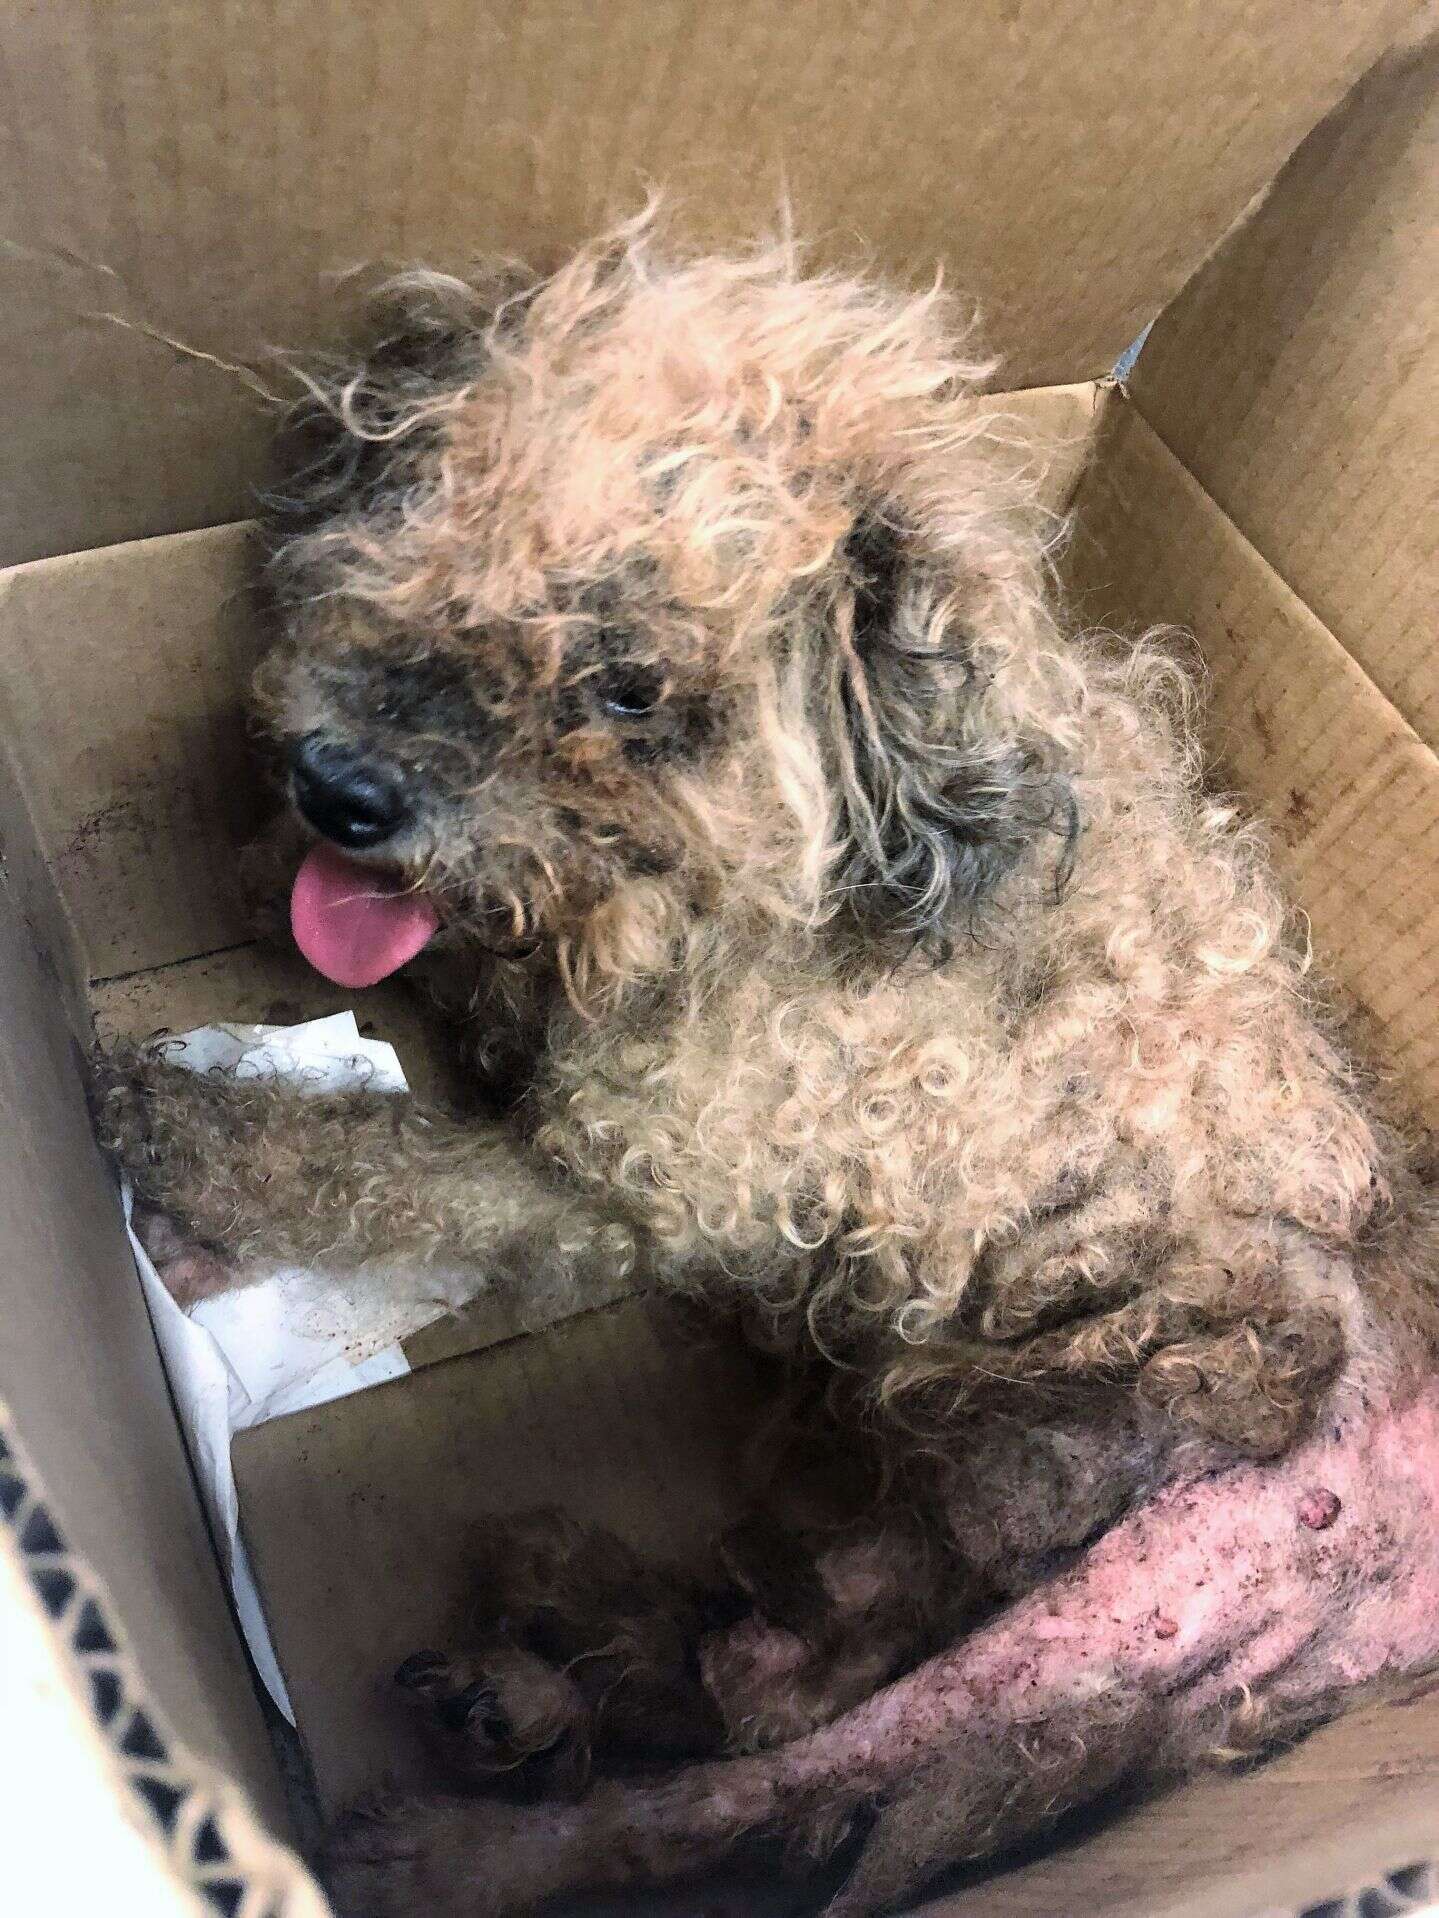 Halle the dog abandoned in cardboard box